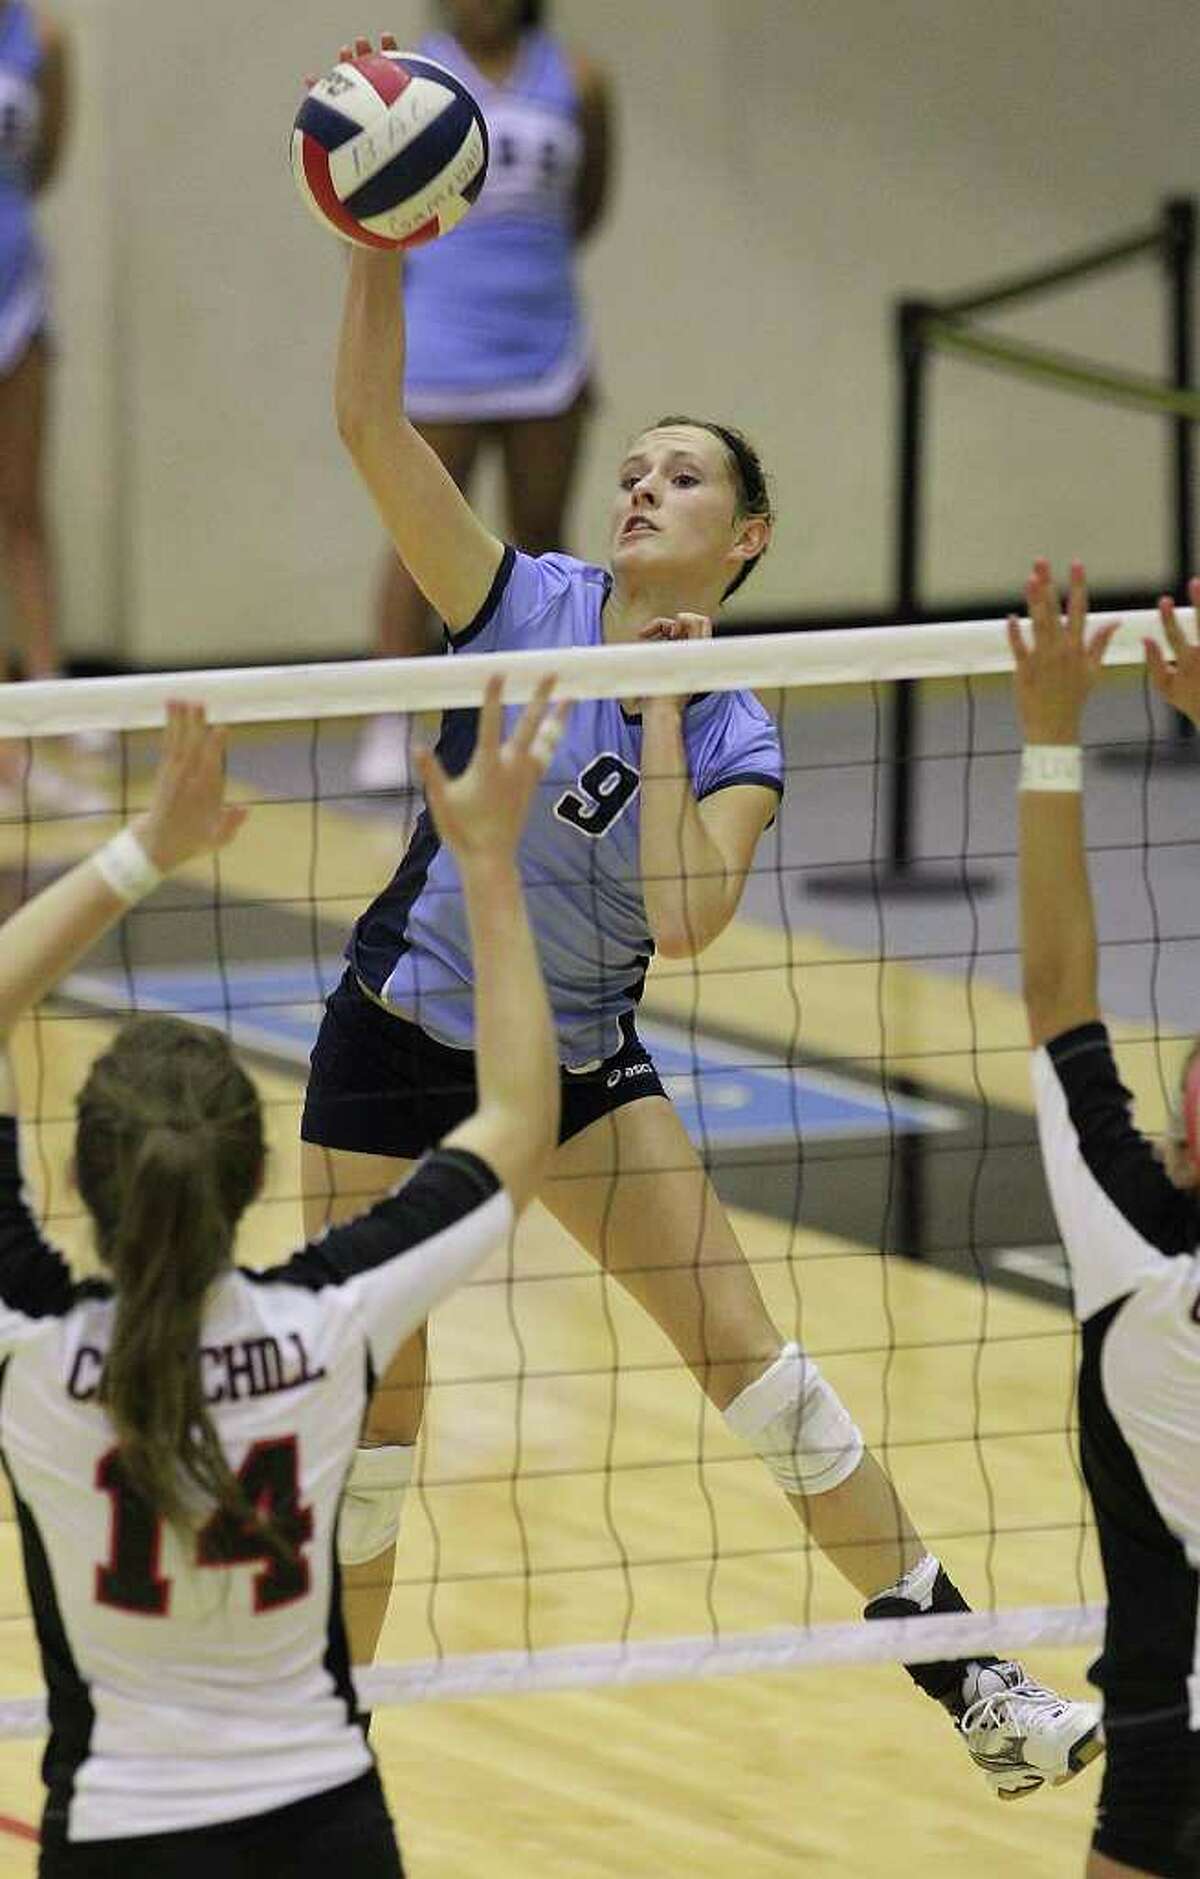 Johnson's Kassie Freitag (09) looks to score against Churchill's Audrey Sanders (14) and Jordan Holub (04) in volleyball at Littleton Gym on Tuesday, Oct. 18, 2011. Johnson defeated Churchill in three straight games. Kin Man Hui/kmhui@express-news.net